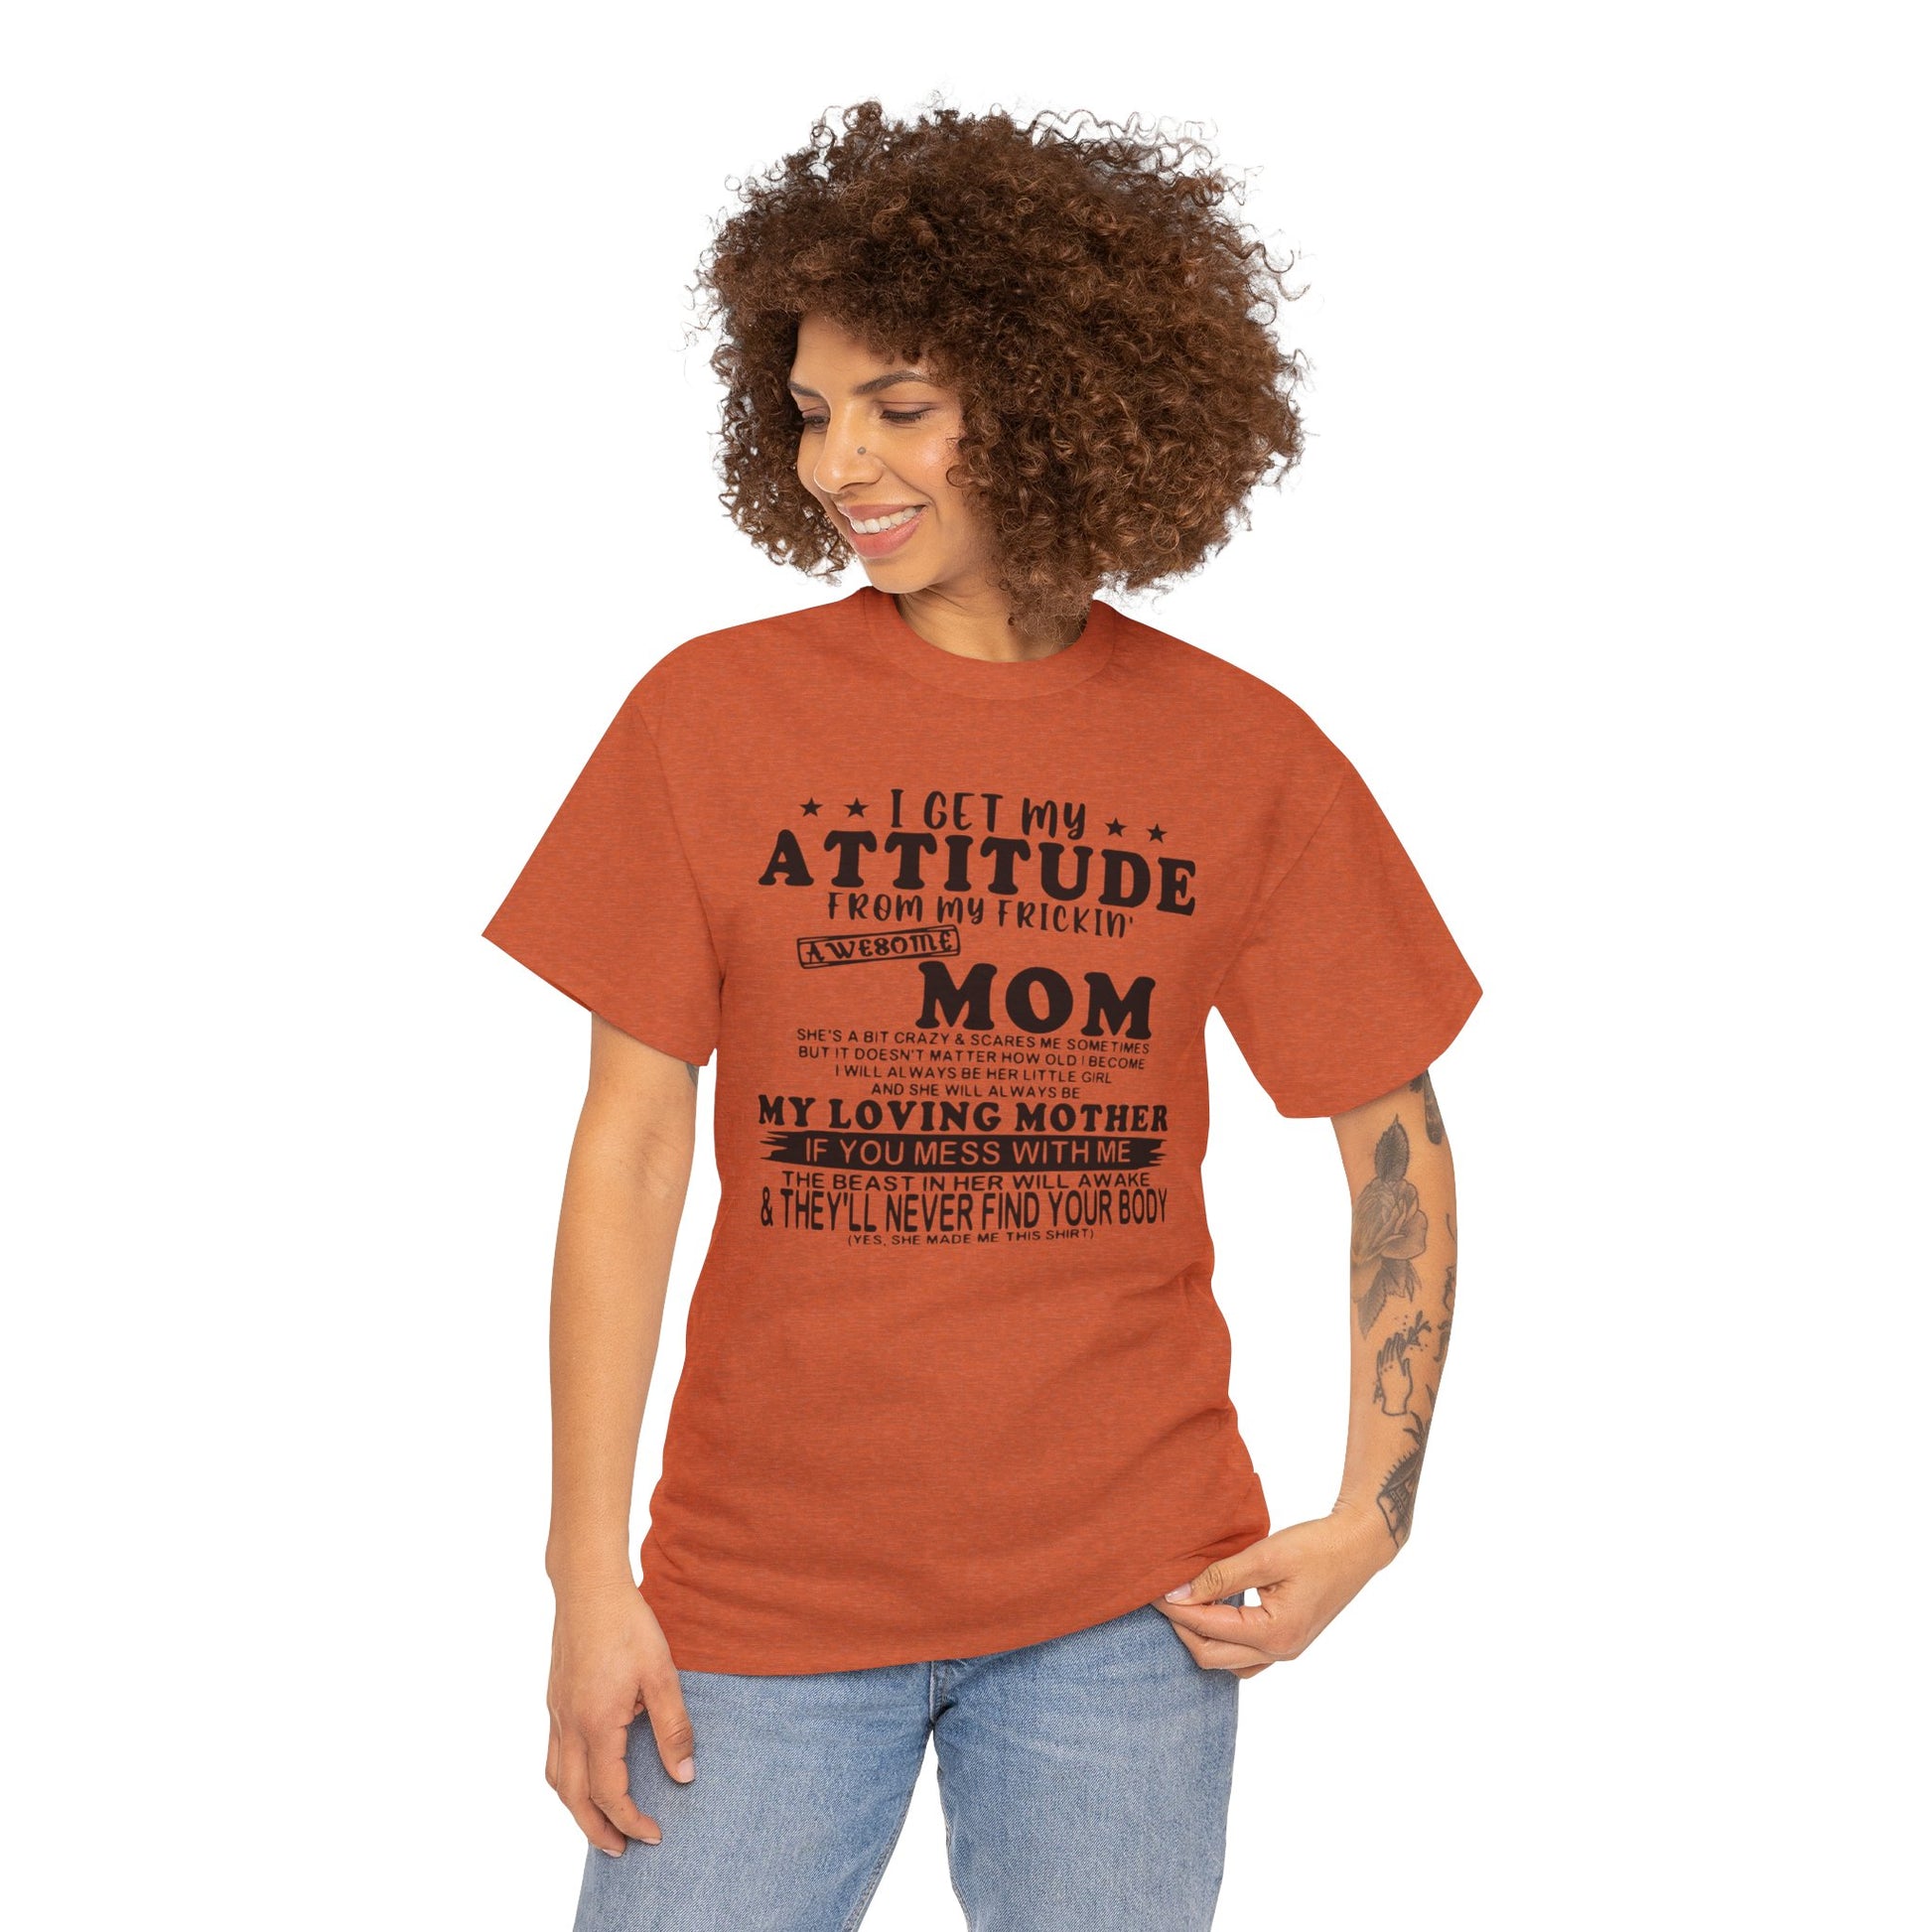 Classic fit unisex t-shirt celebrating the unique mother-child bond with a quirky quote.